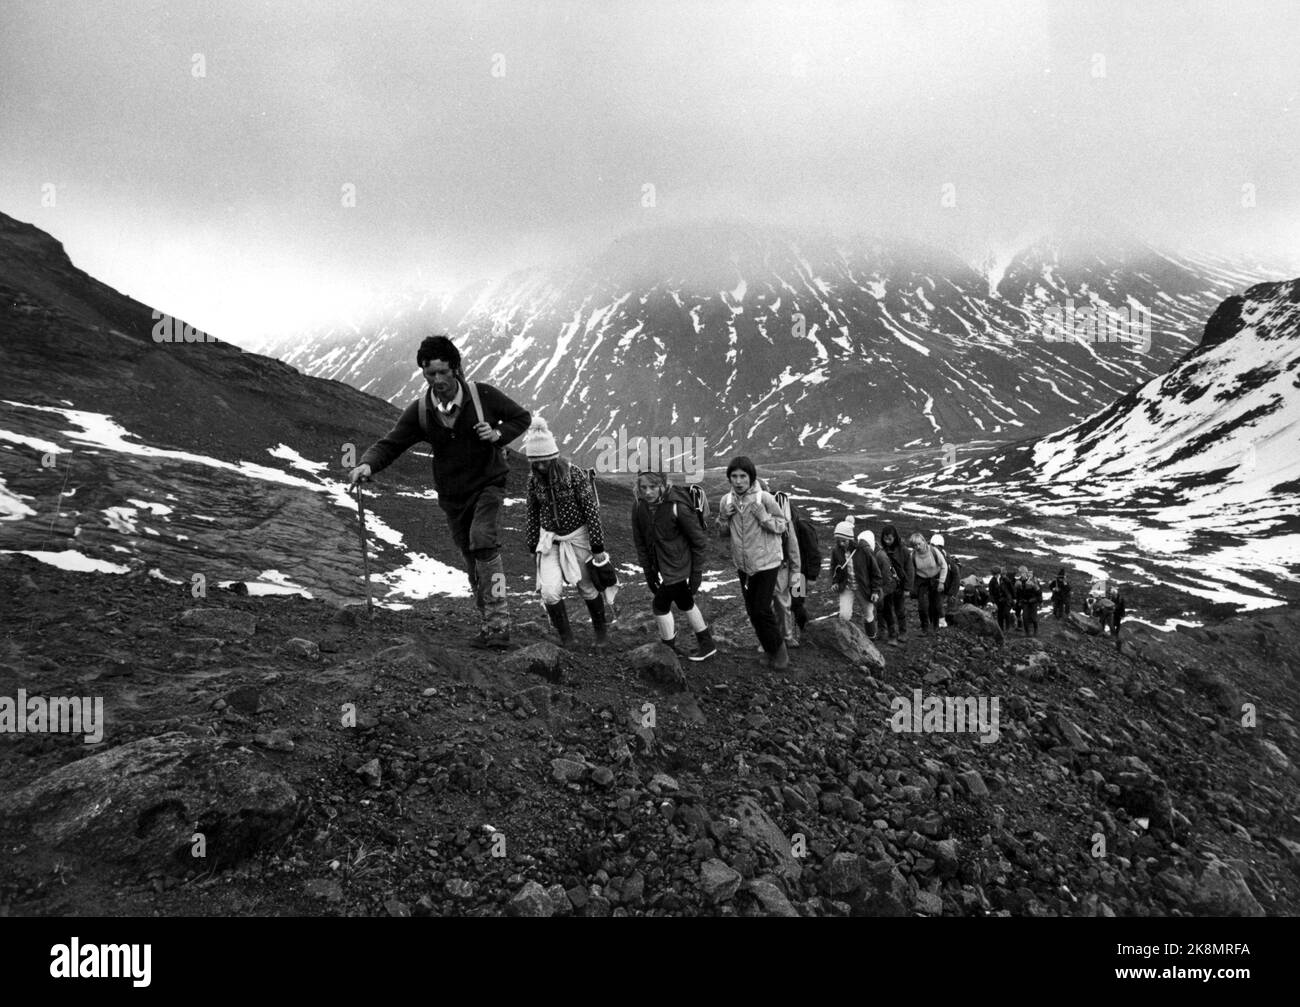 Jotunheimen May 1970. Varden Fjellskole, camp school at Spiterstulen, run by Eiliv Sulheim. School students on a mountain hike. Wolf Stauber shows how to walk in the mountains: short steps - don't talk too much. It takes the breath. Photo: Ivar Aaserud / Current / NTB Stock Photo